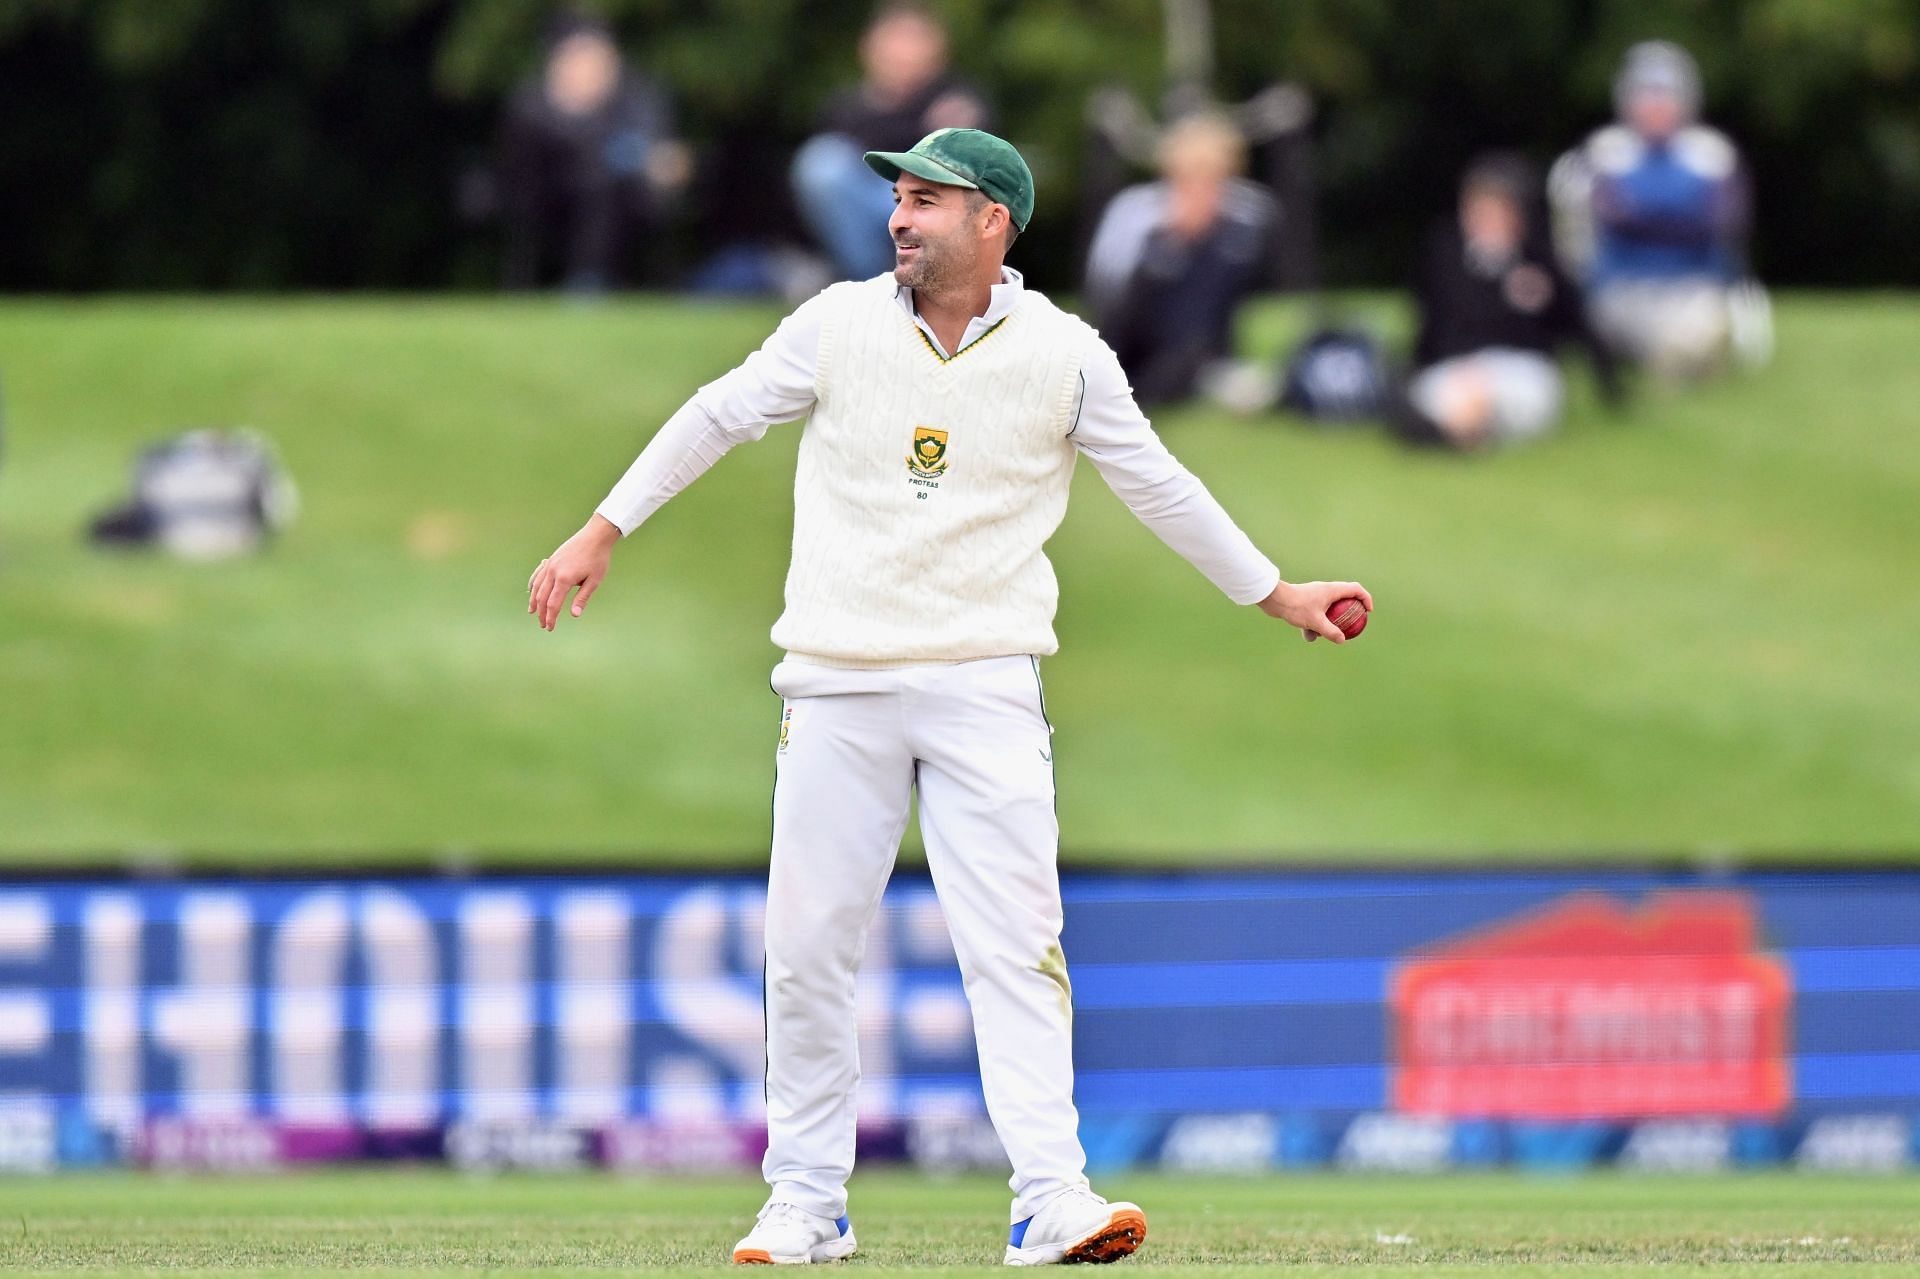 New Zealand vs South Africa - 2nd Test: Day 3